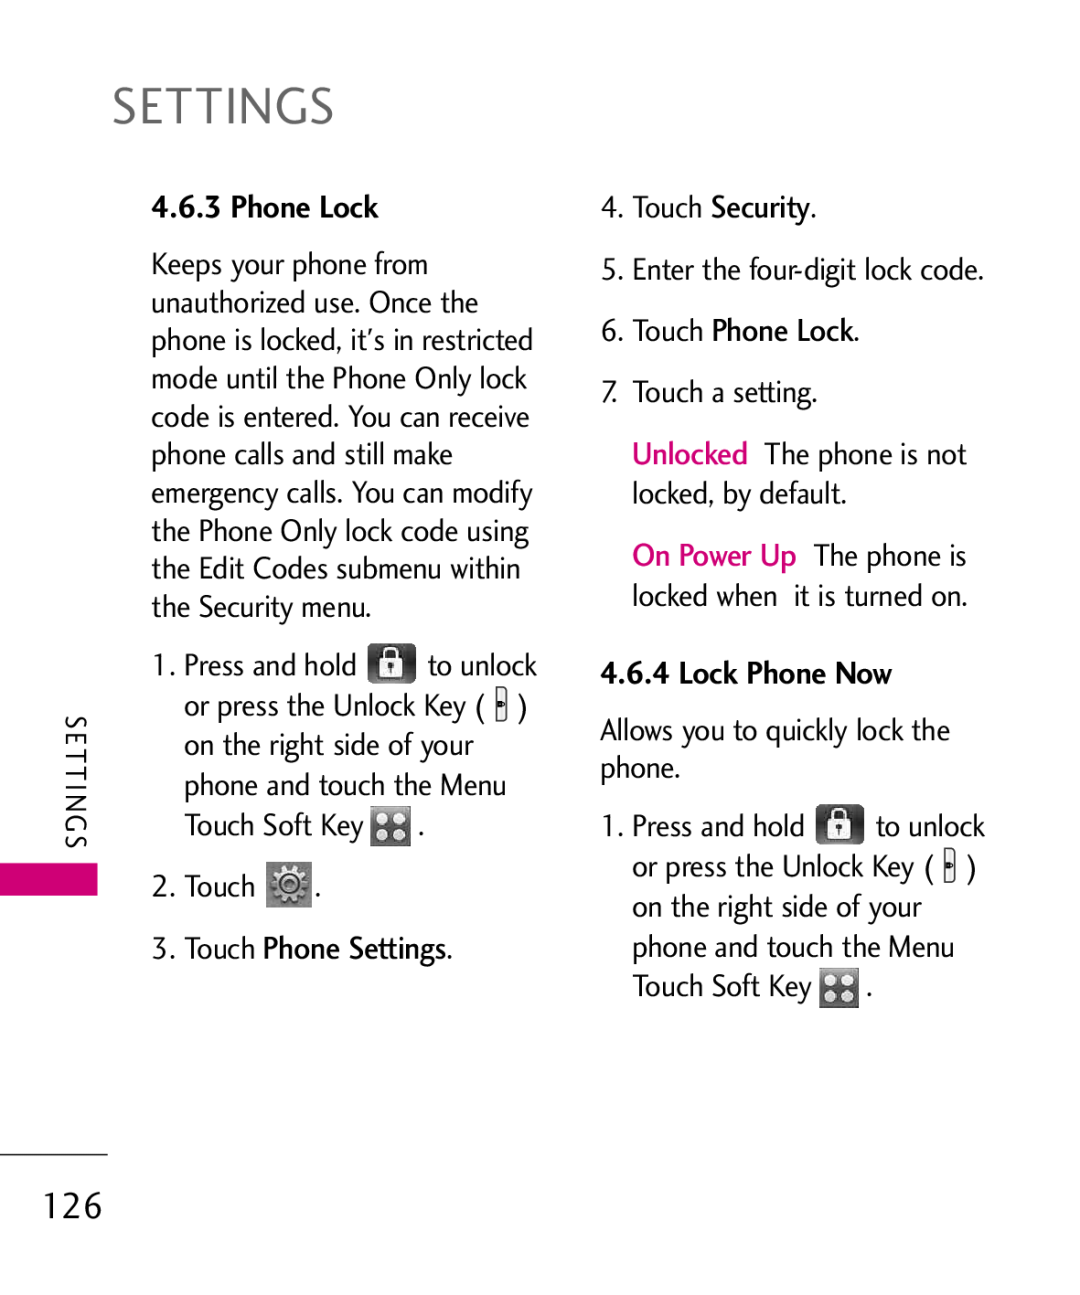 LG Electronics MMBB0379501 Touch Phone Settings, Touch Security, Touch Phone Lock, Lock Phone Now, Press and hold 